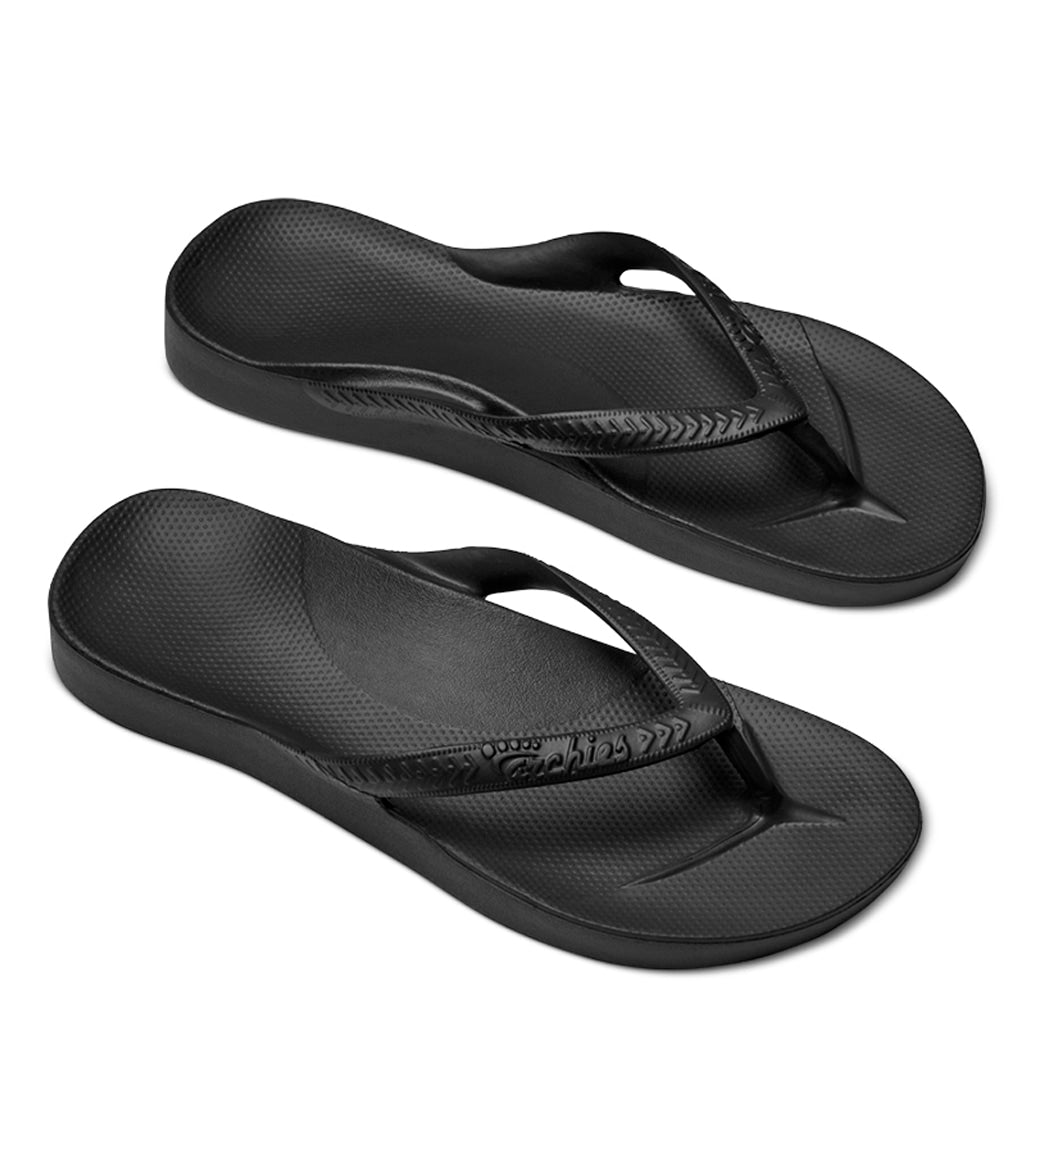 Flip Flops Causing Foot Pain? Try Archies Flip Flops And Get Pain Free! -  Complete Physical Rehabilitation